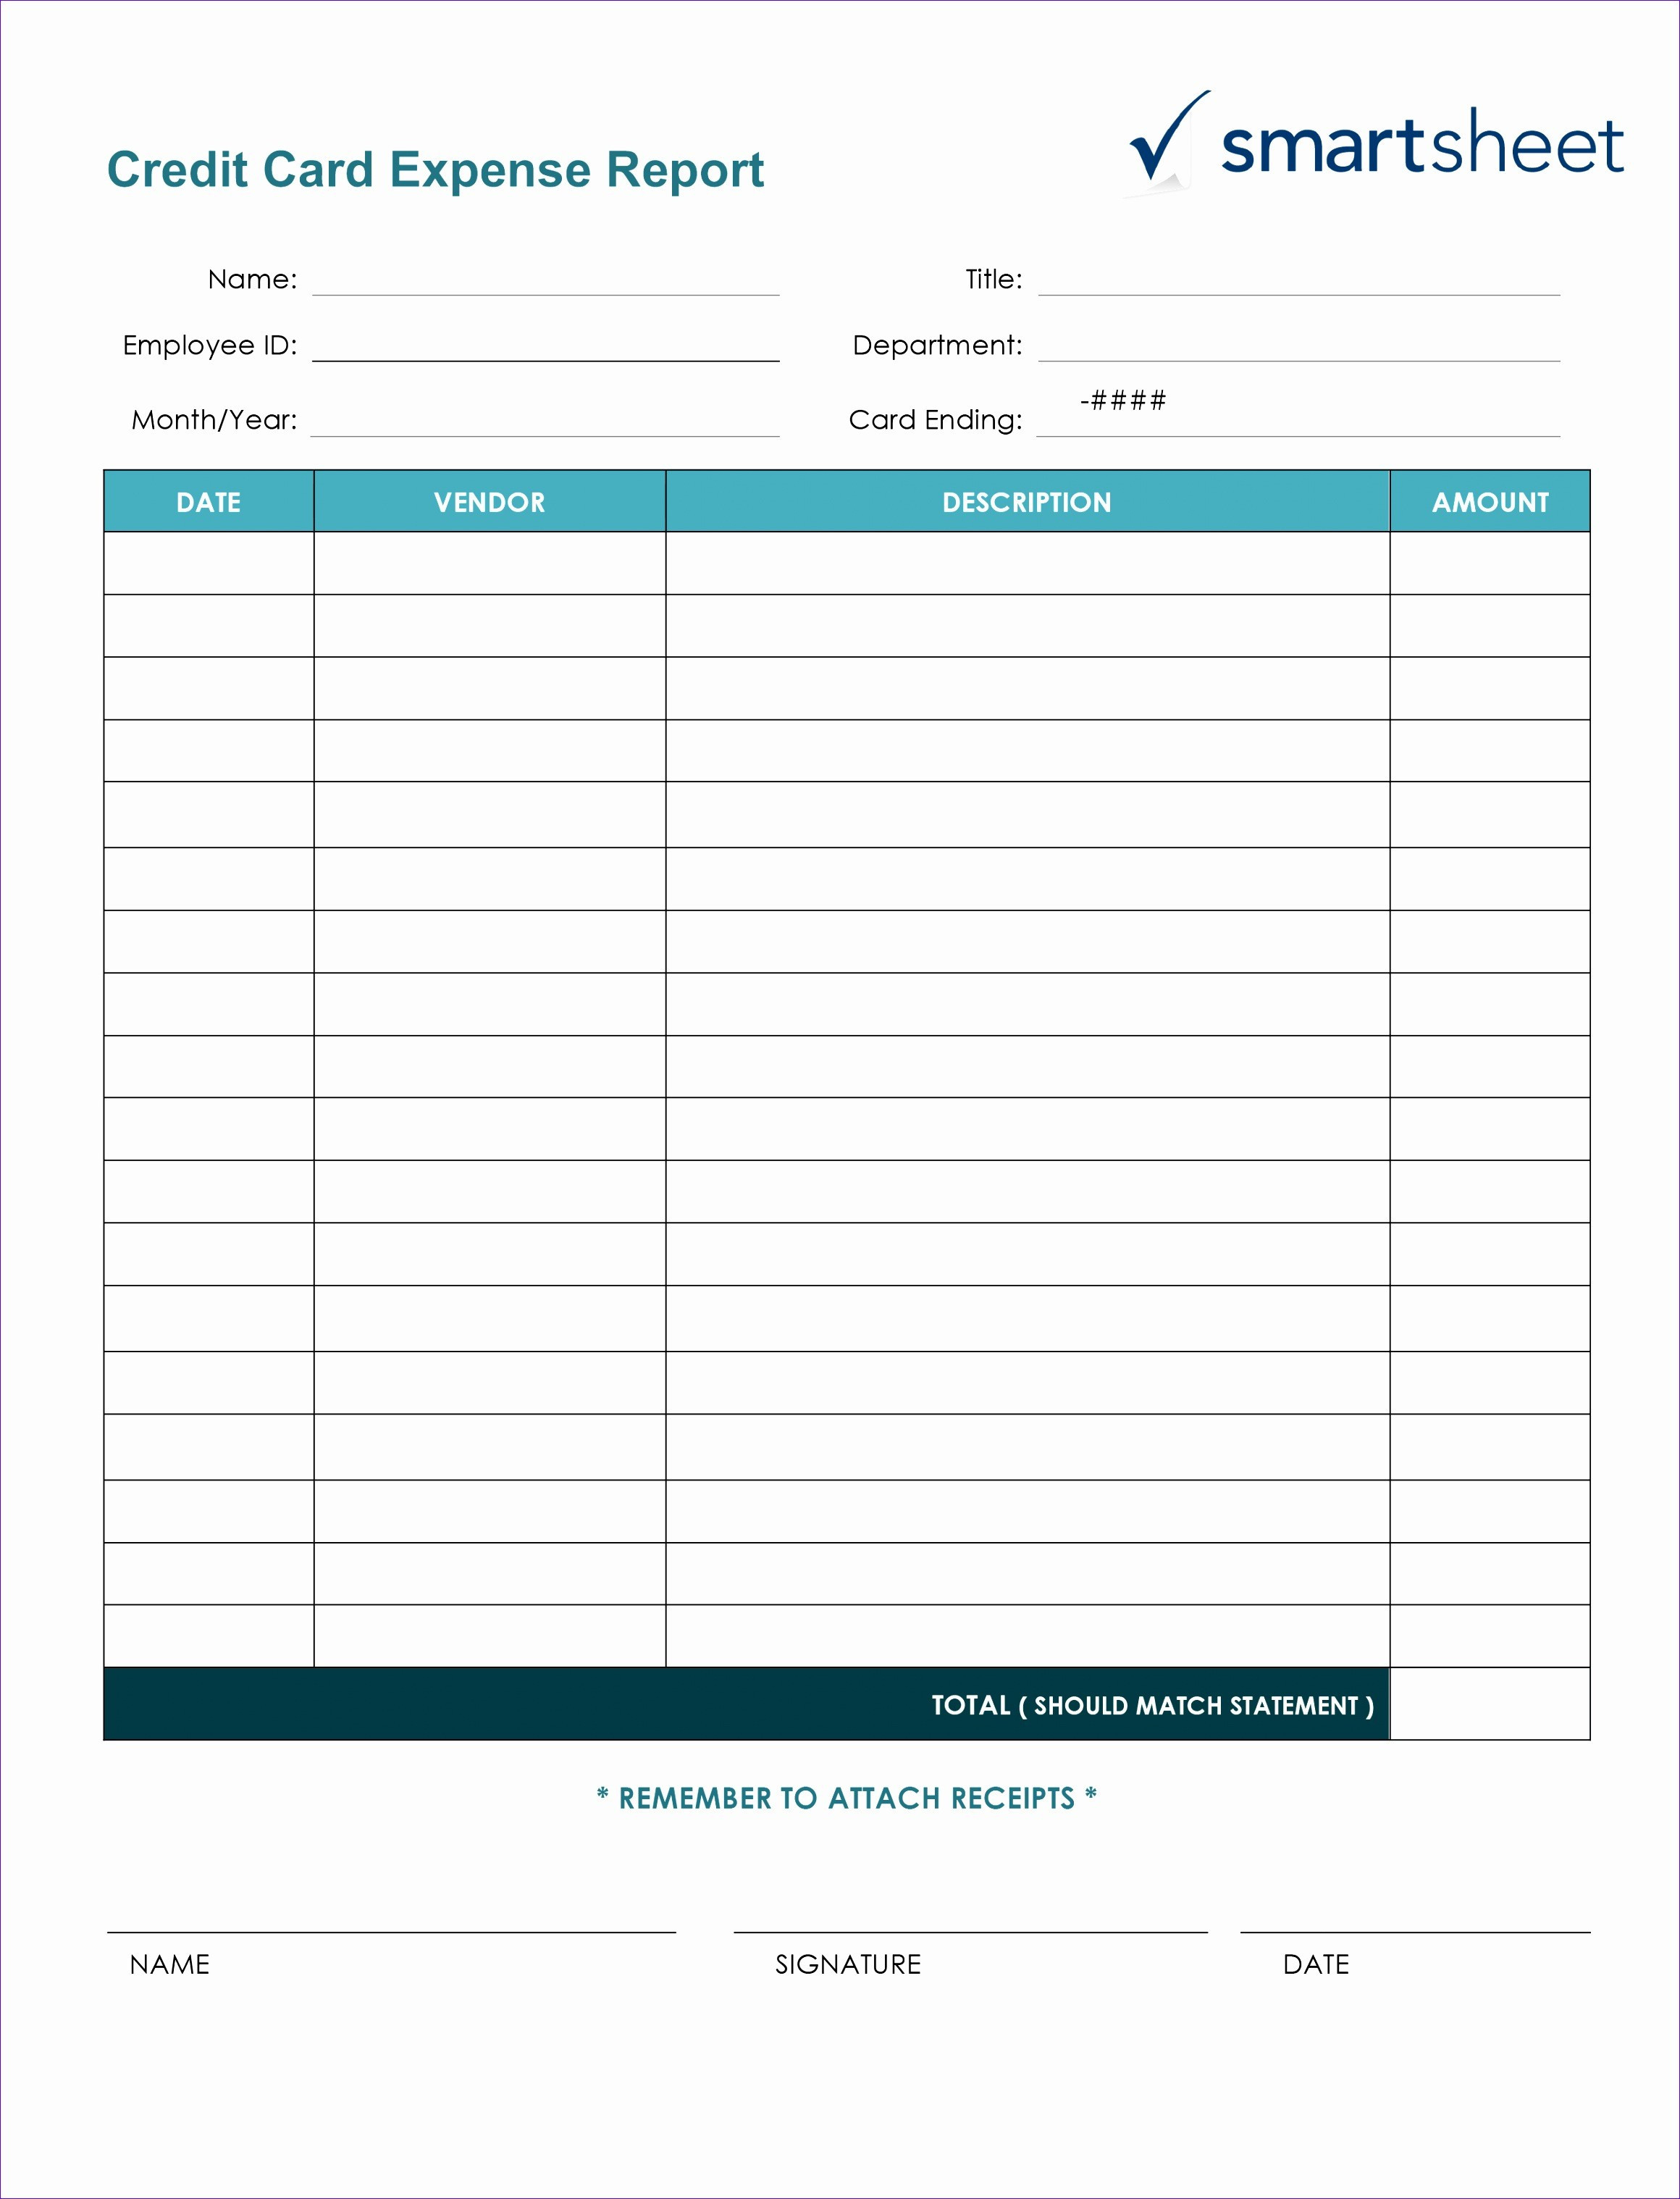 reconciliation-excel-spreadsheet-intended-for-balance-sheet-template